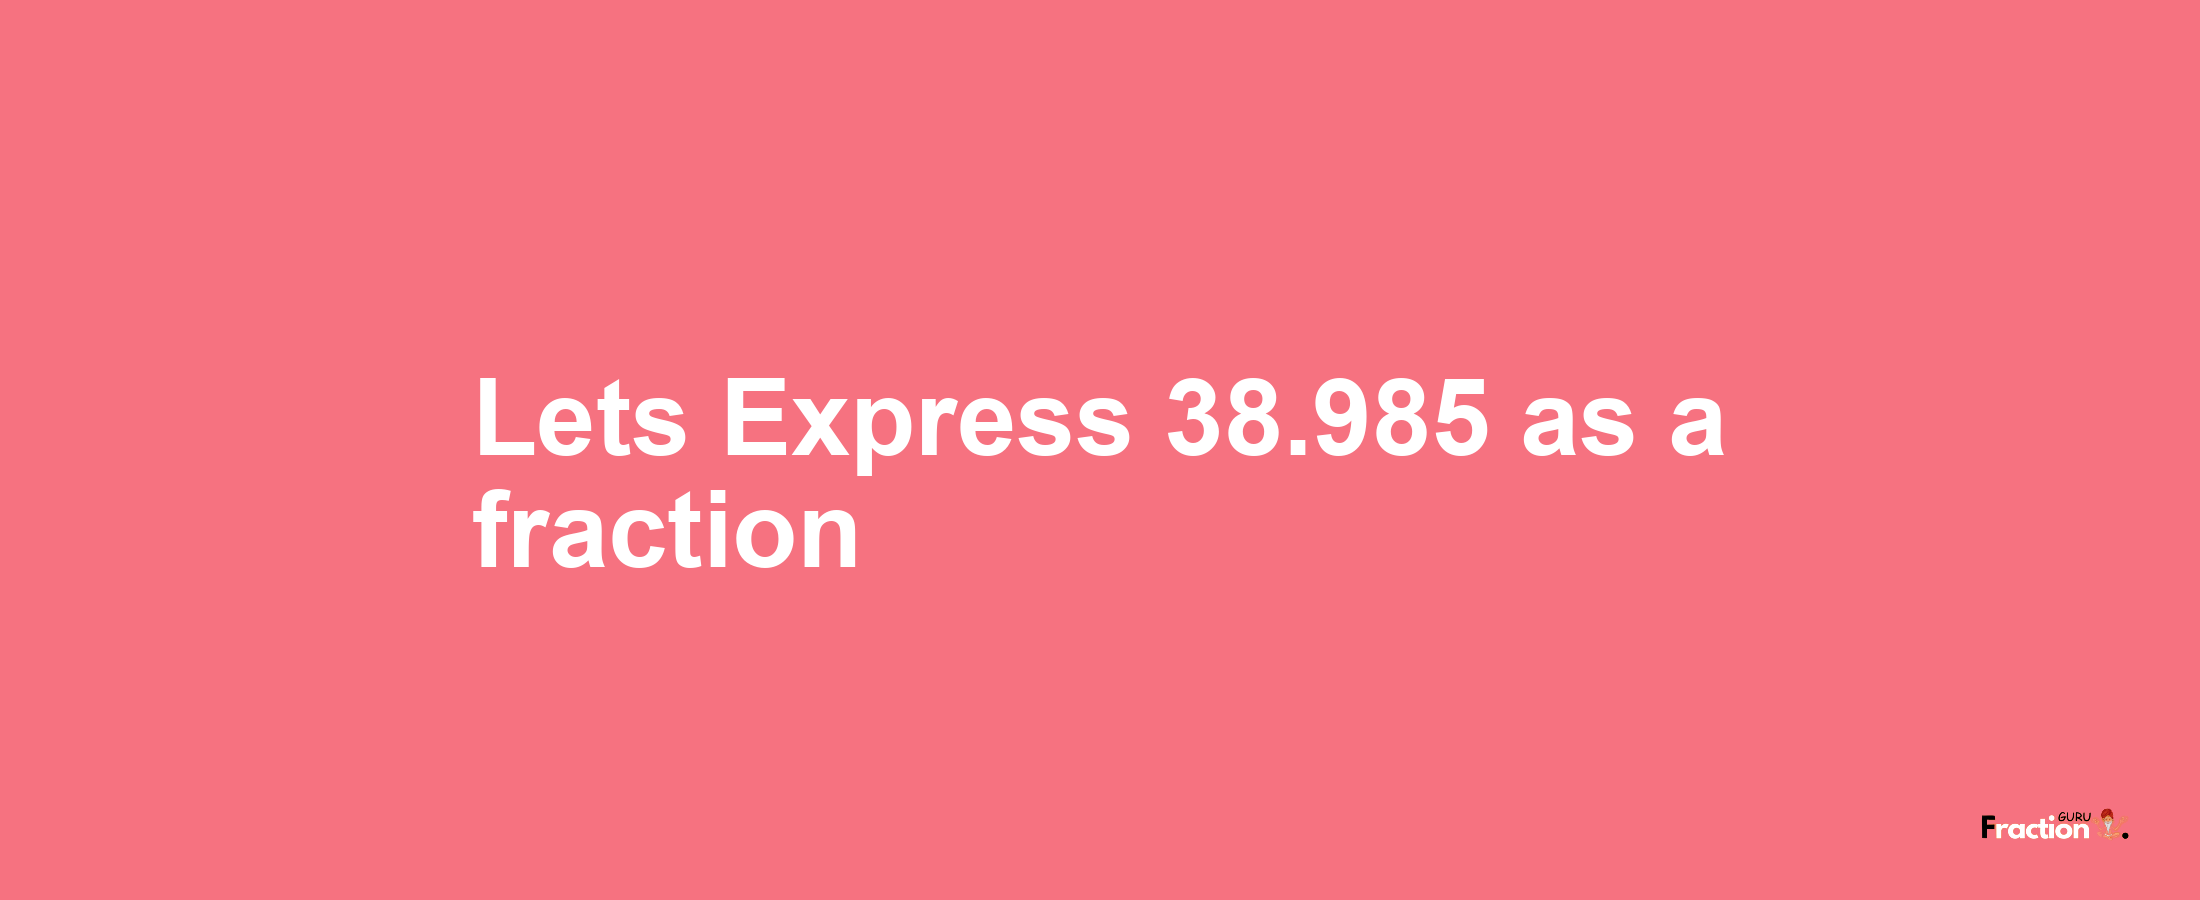 Lets Express 38.985 as afraction